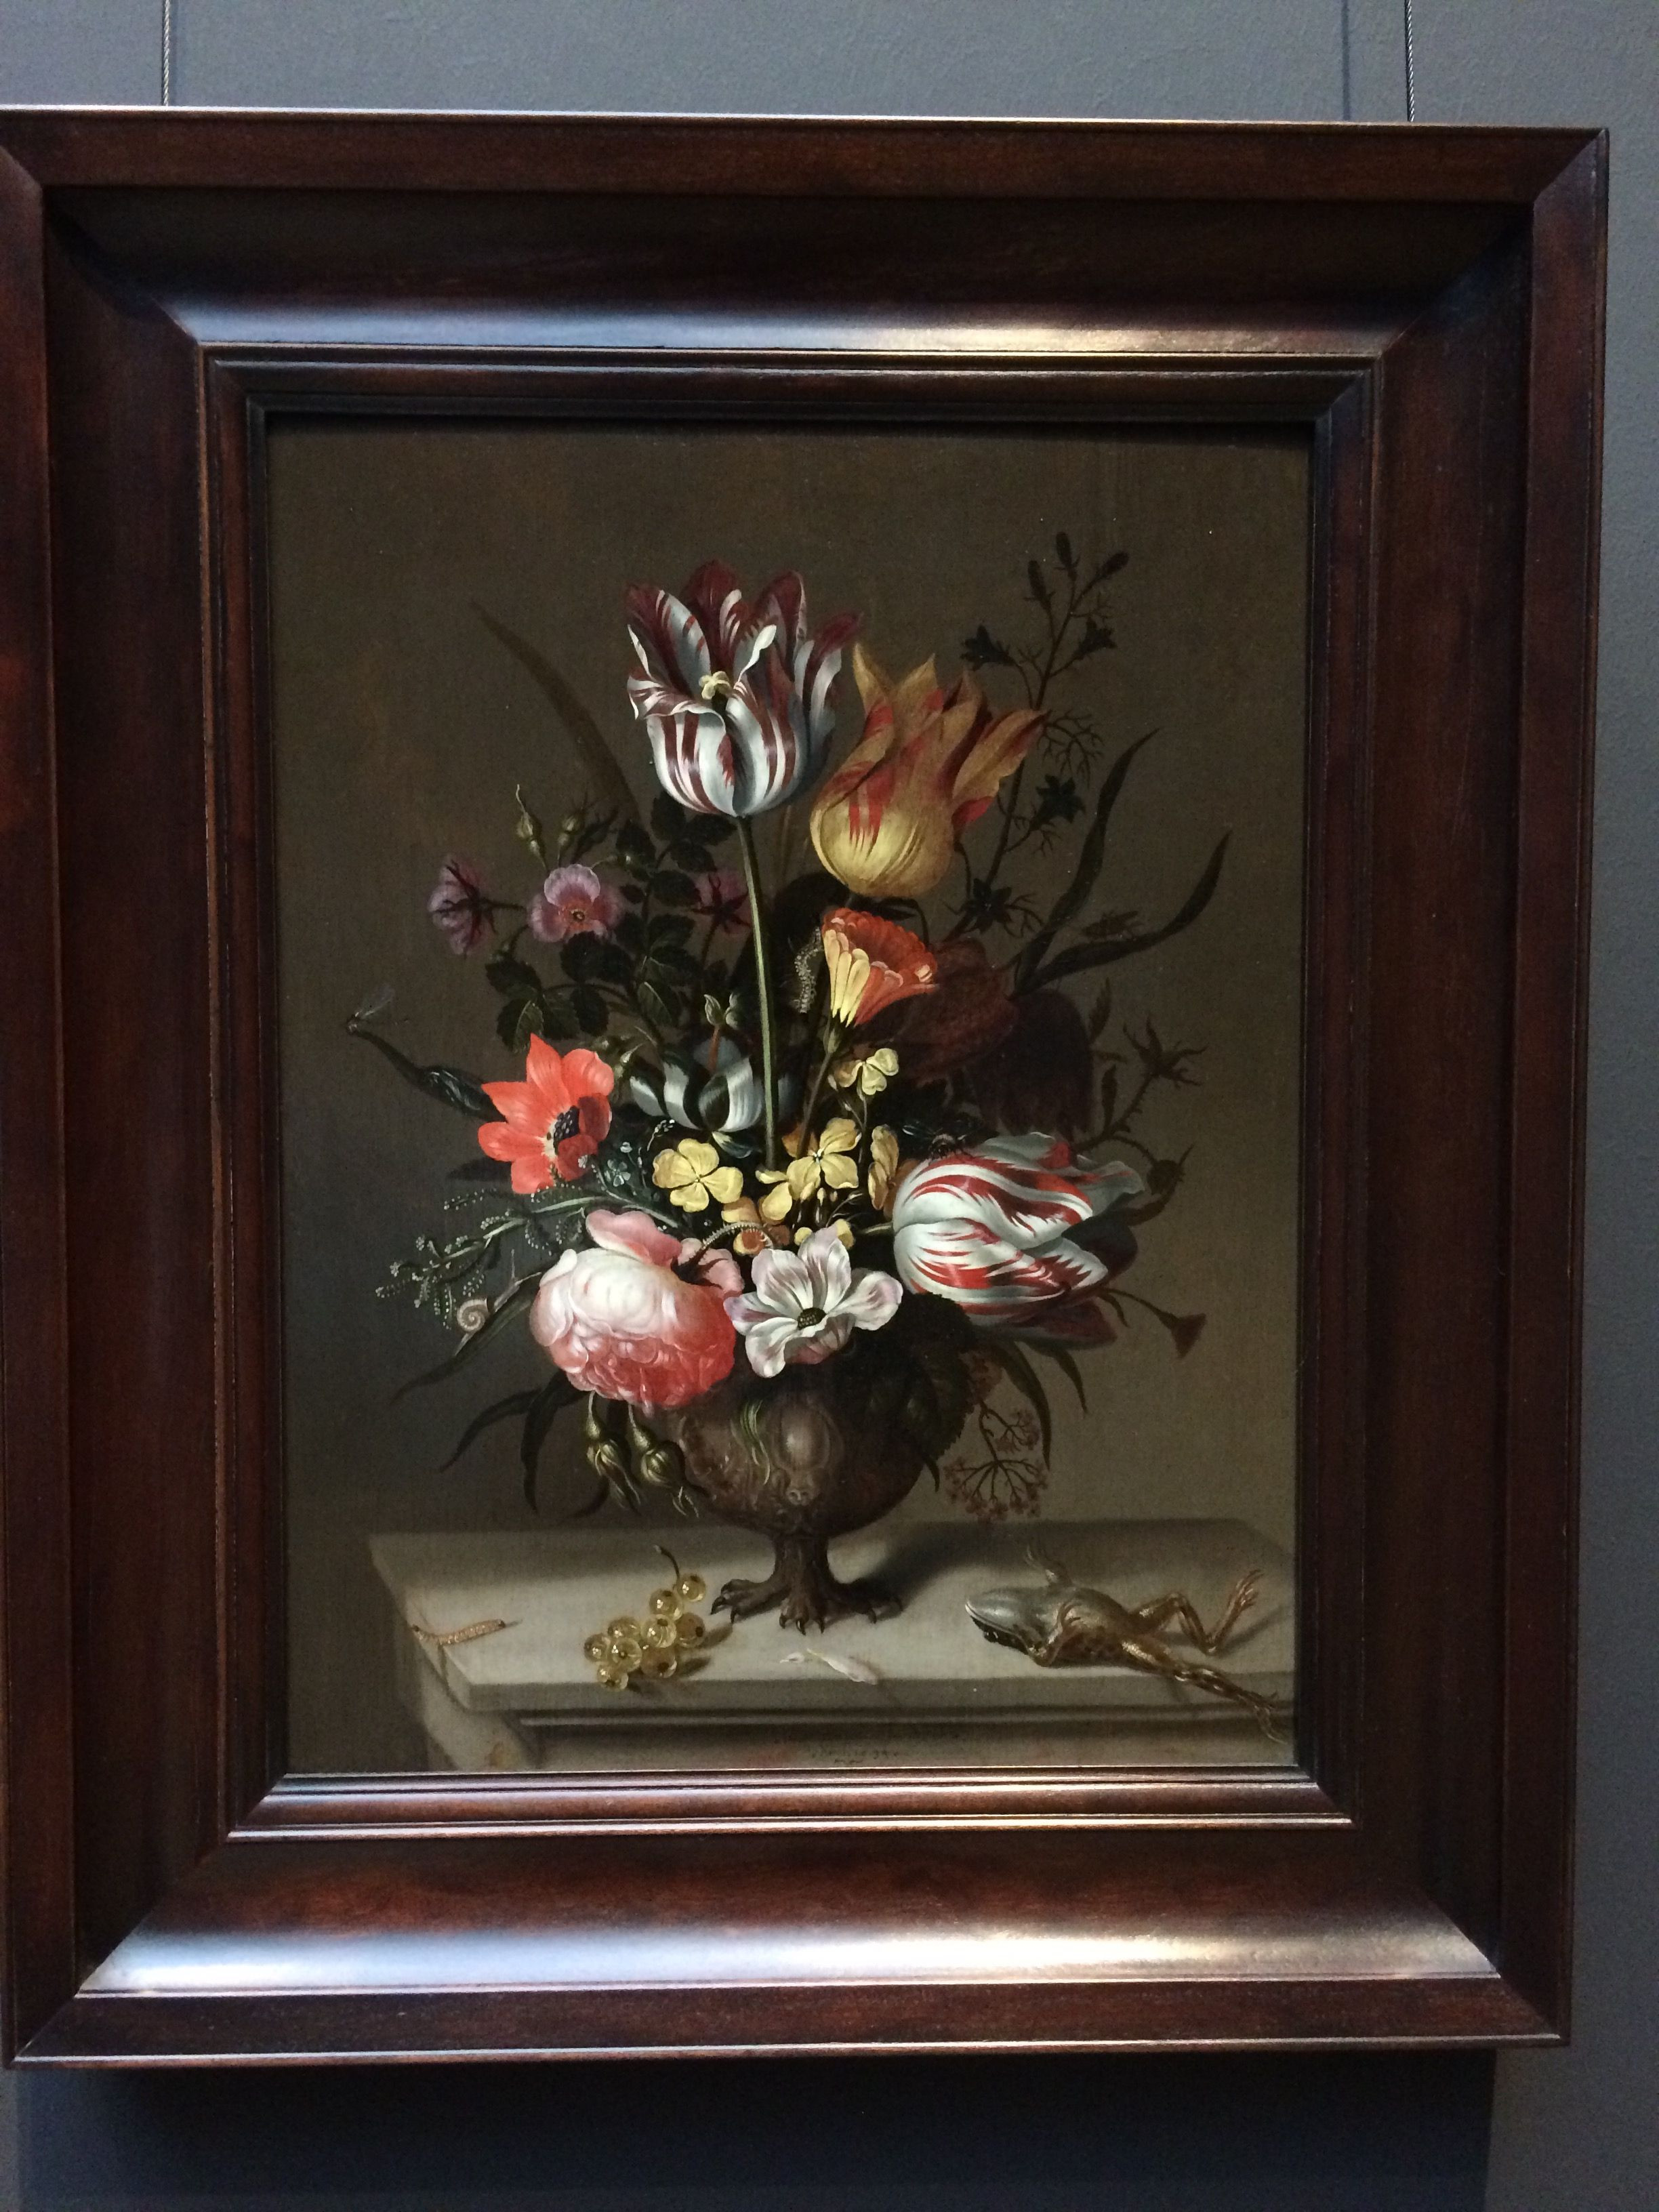 17 Wonderful Still Life Flowers In A Vase 2024 free download still life flowers in a vase of still life with a vase of flowers and a dead frog by jacob marrel for still life with a vase of flowers and a dead frog by jacob marrel the rijksmuseum amster